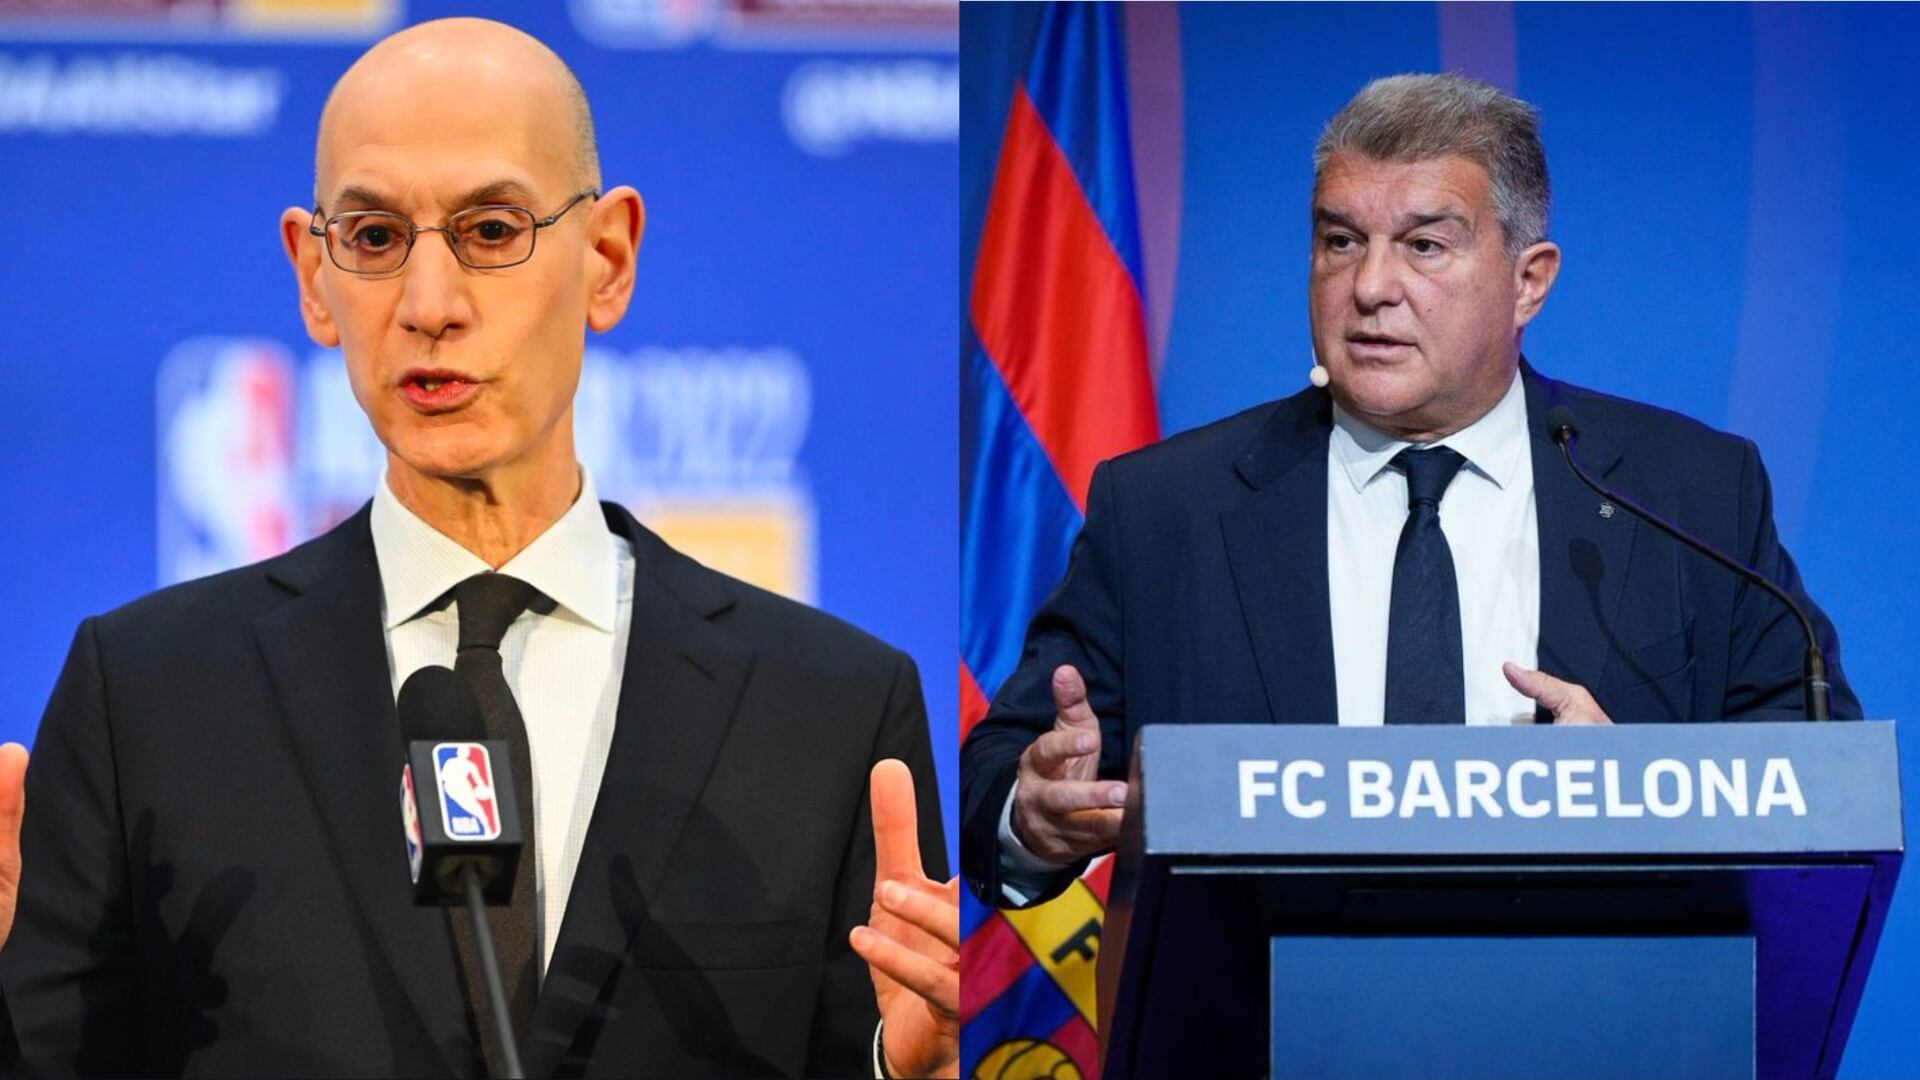 While Real Madrid will host NFL, look what FC Barcelona want to do with NBA